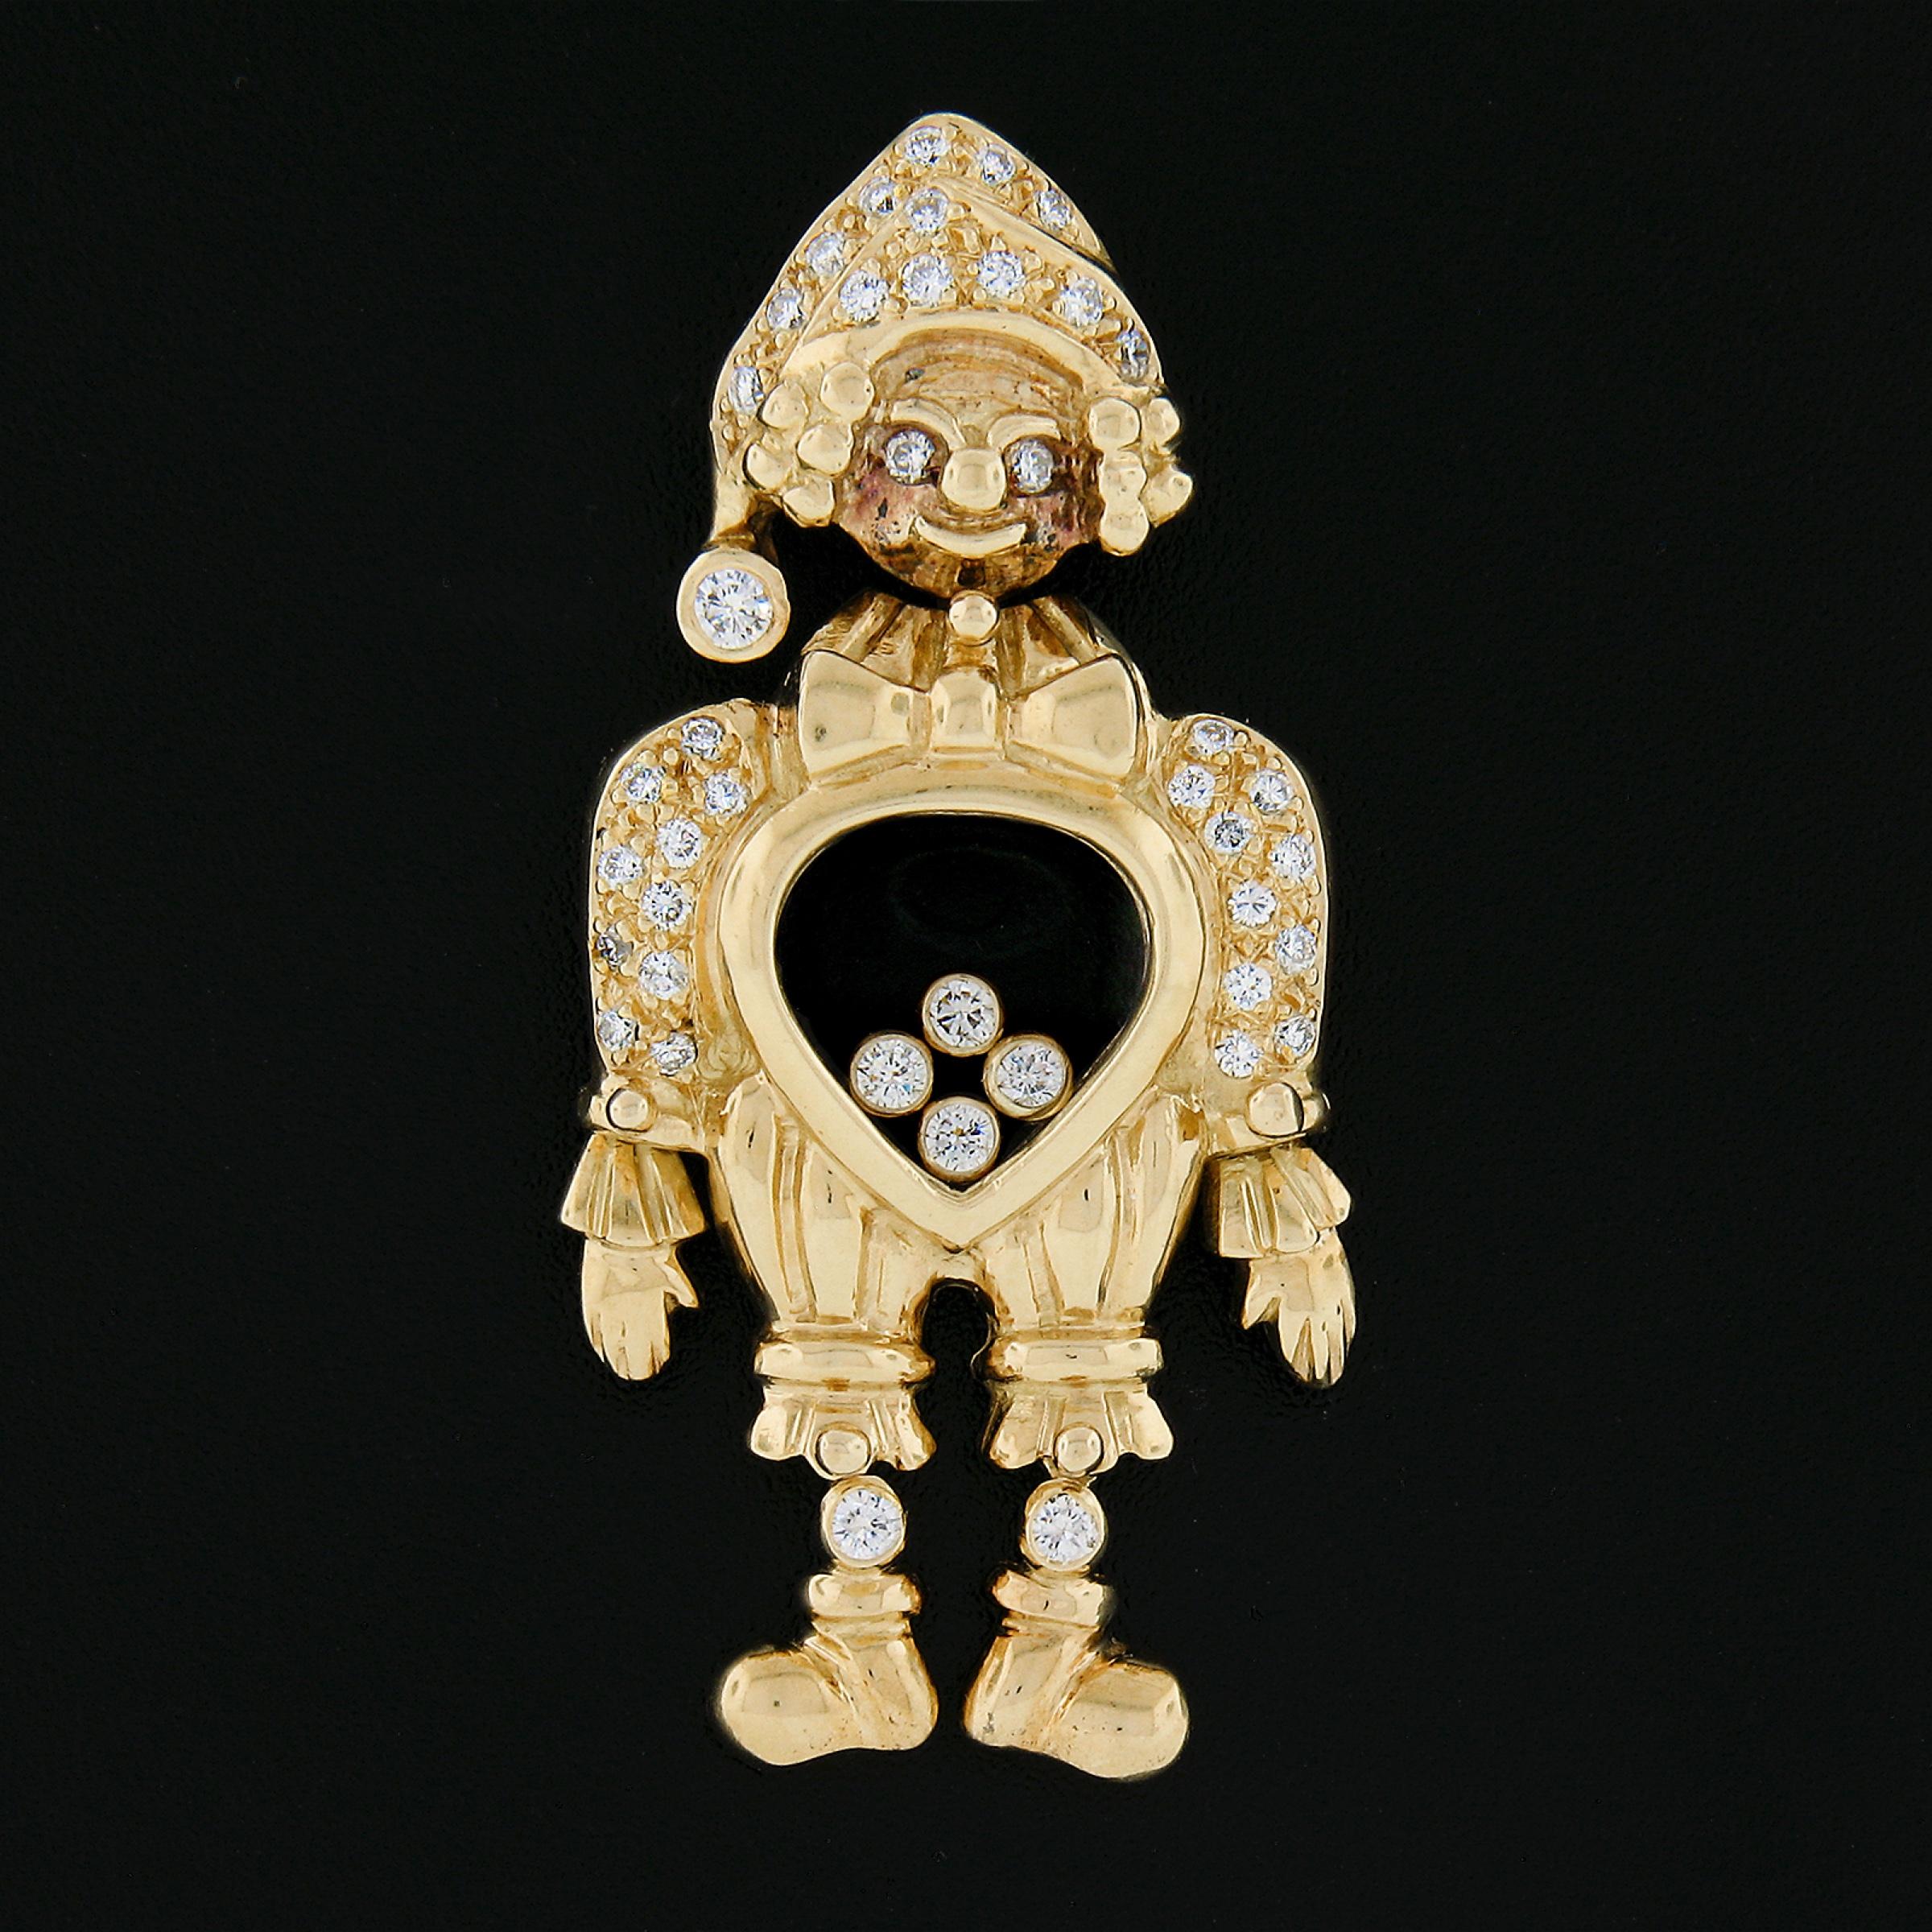 This unique large boy or clown pendant is crafted in solid 18k yellow gold and is adorned with 42 round brilliant cut diamonds totaling approximately 0.65 carats. The pendant features movable legs, head, & 4 bezel set floating diamonds at the center